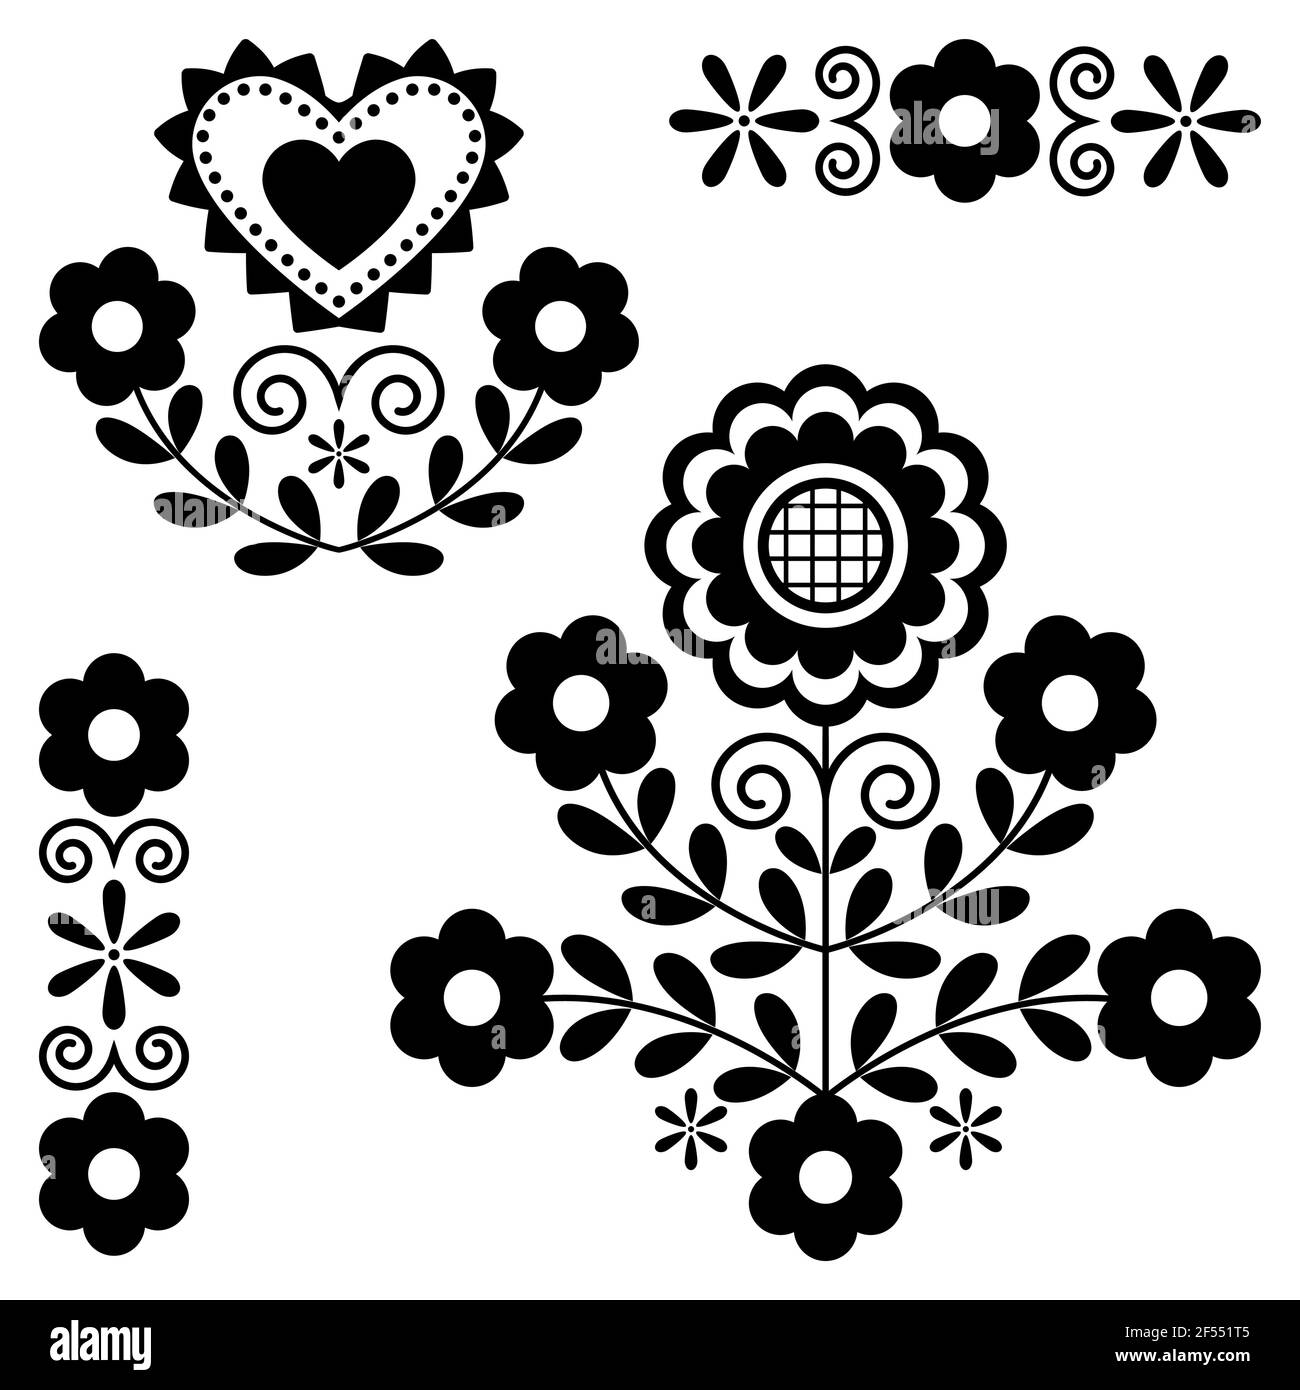 Cute Polish Floral folk art vector monochrome design elements inspired by traditional highlanders embroidery Lachy Sadeckie from Nowy Sacz in Poland Stock Vector